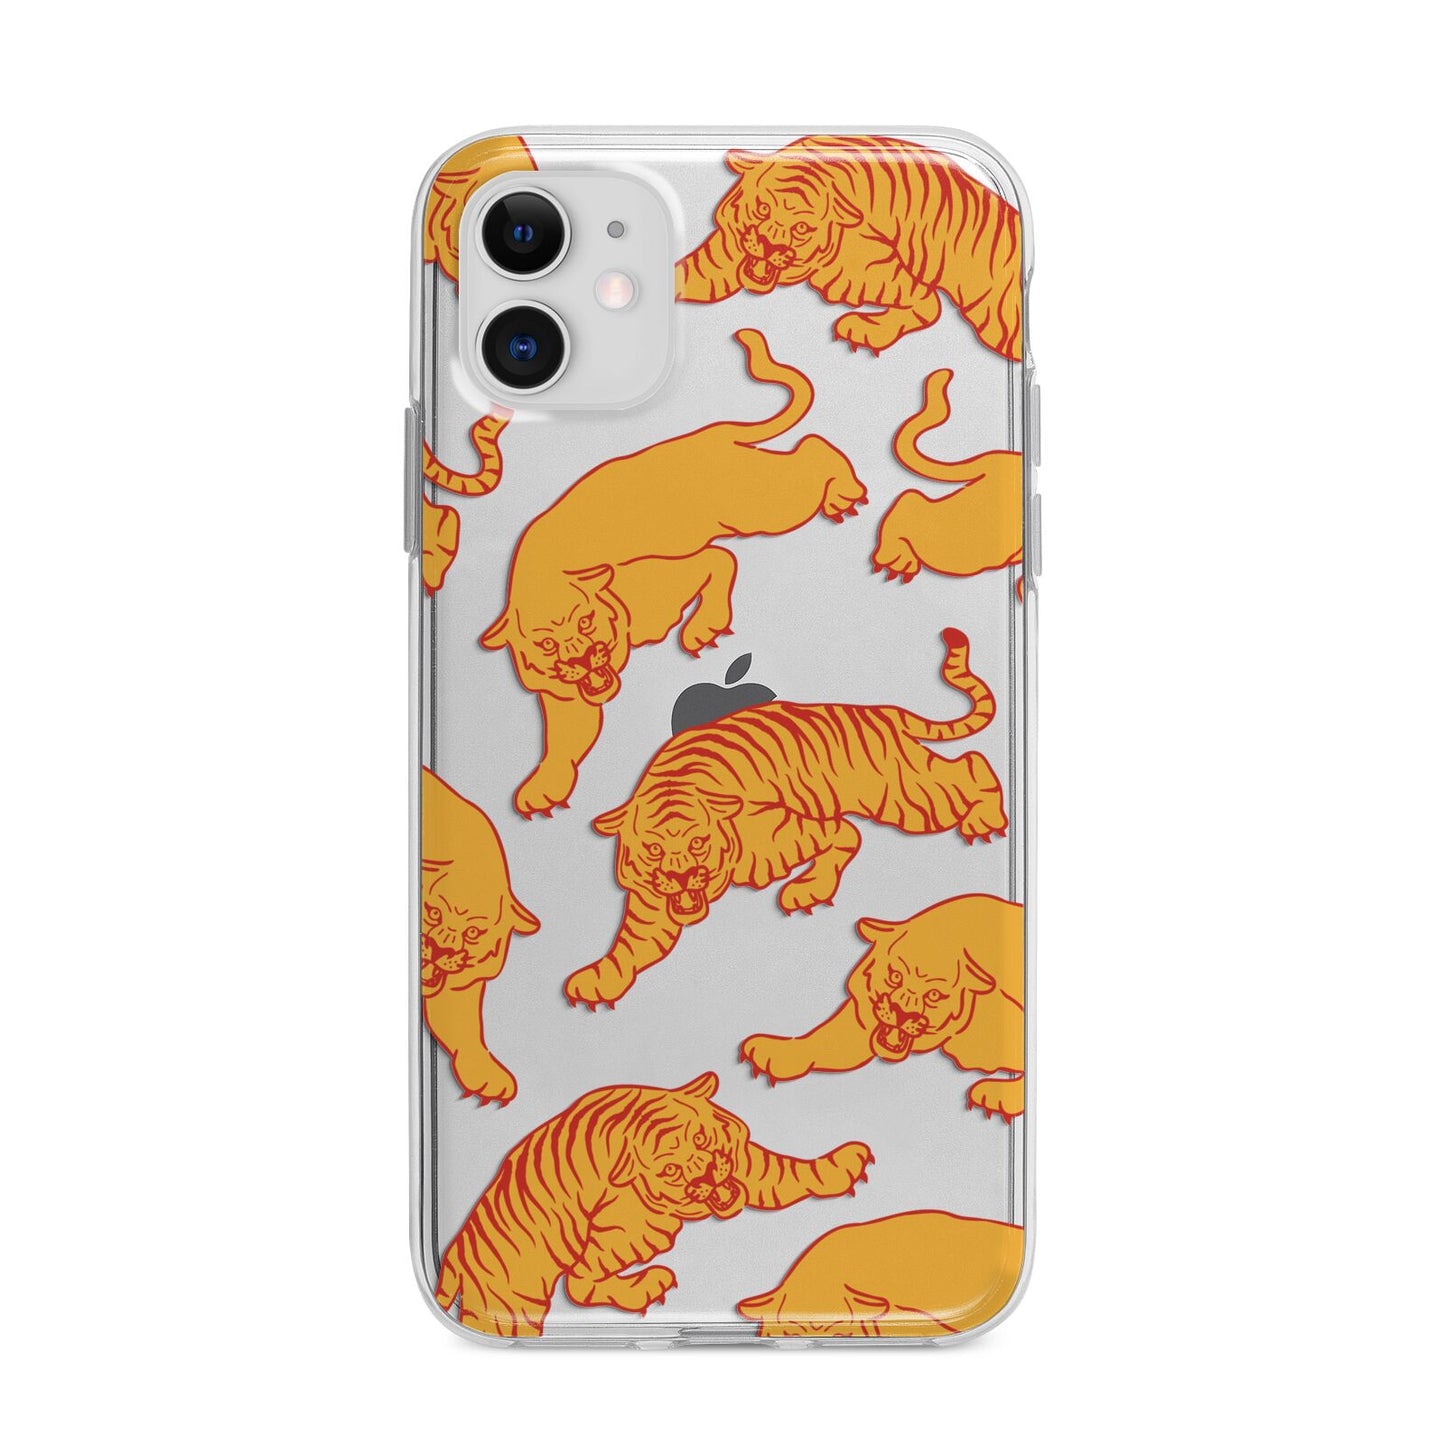 Tiger Apple iPhone 11 in White with Bumper Case